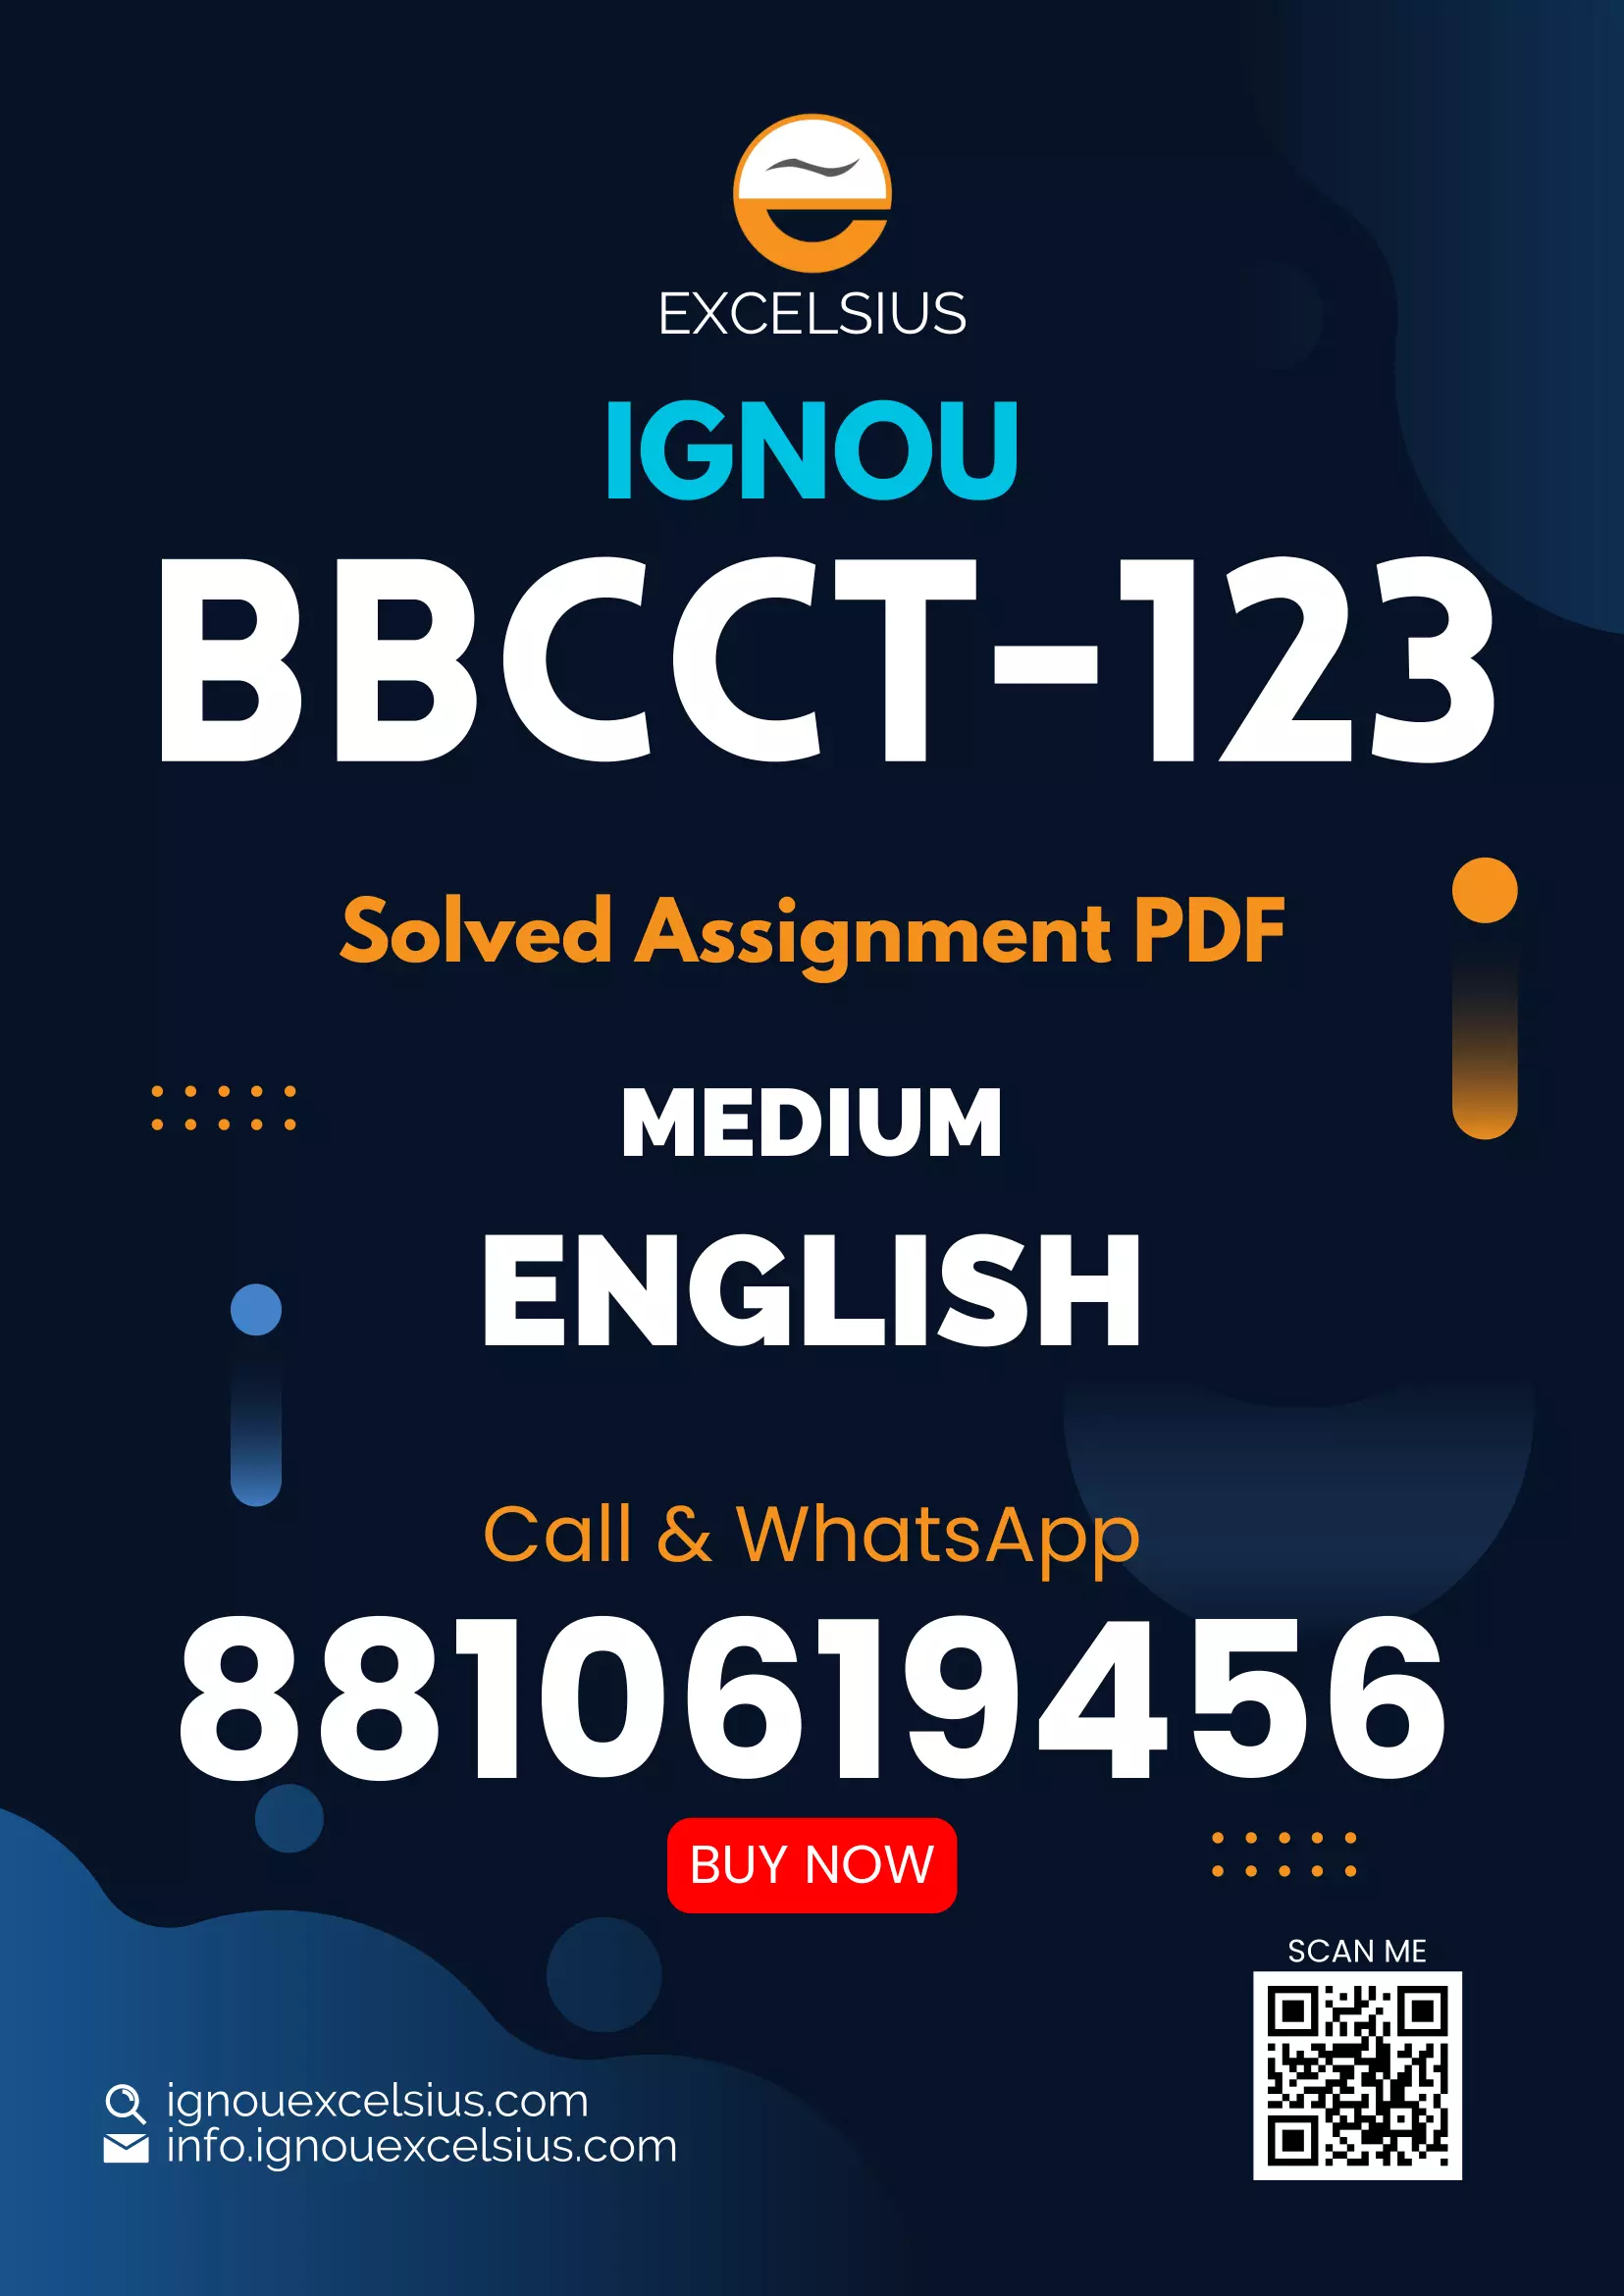 IGNOU BBCCT-123 - Gene Expression and Regulation Latest Solved Assignment-January 2023 - December 2023